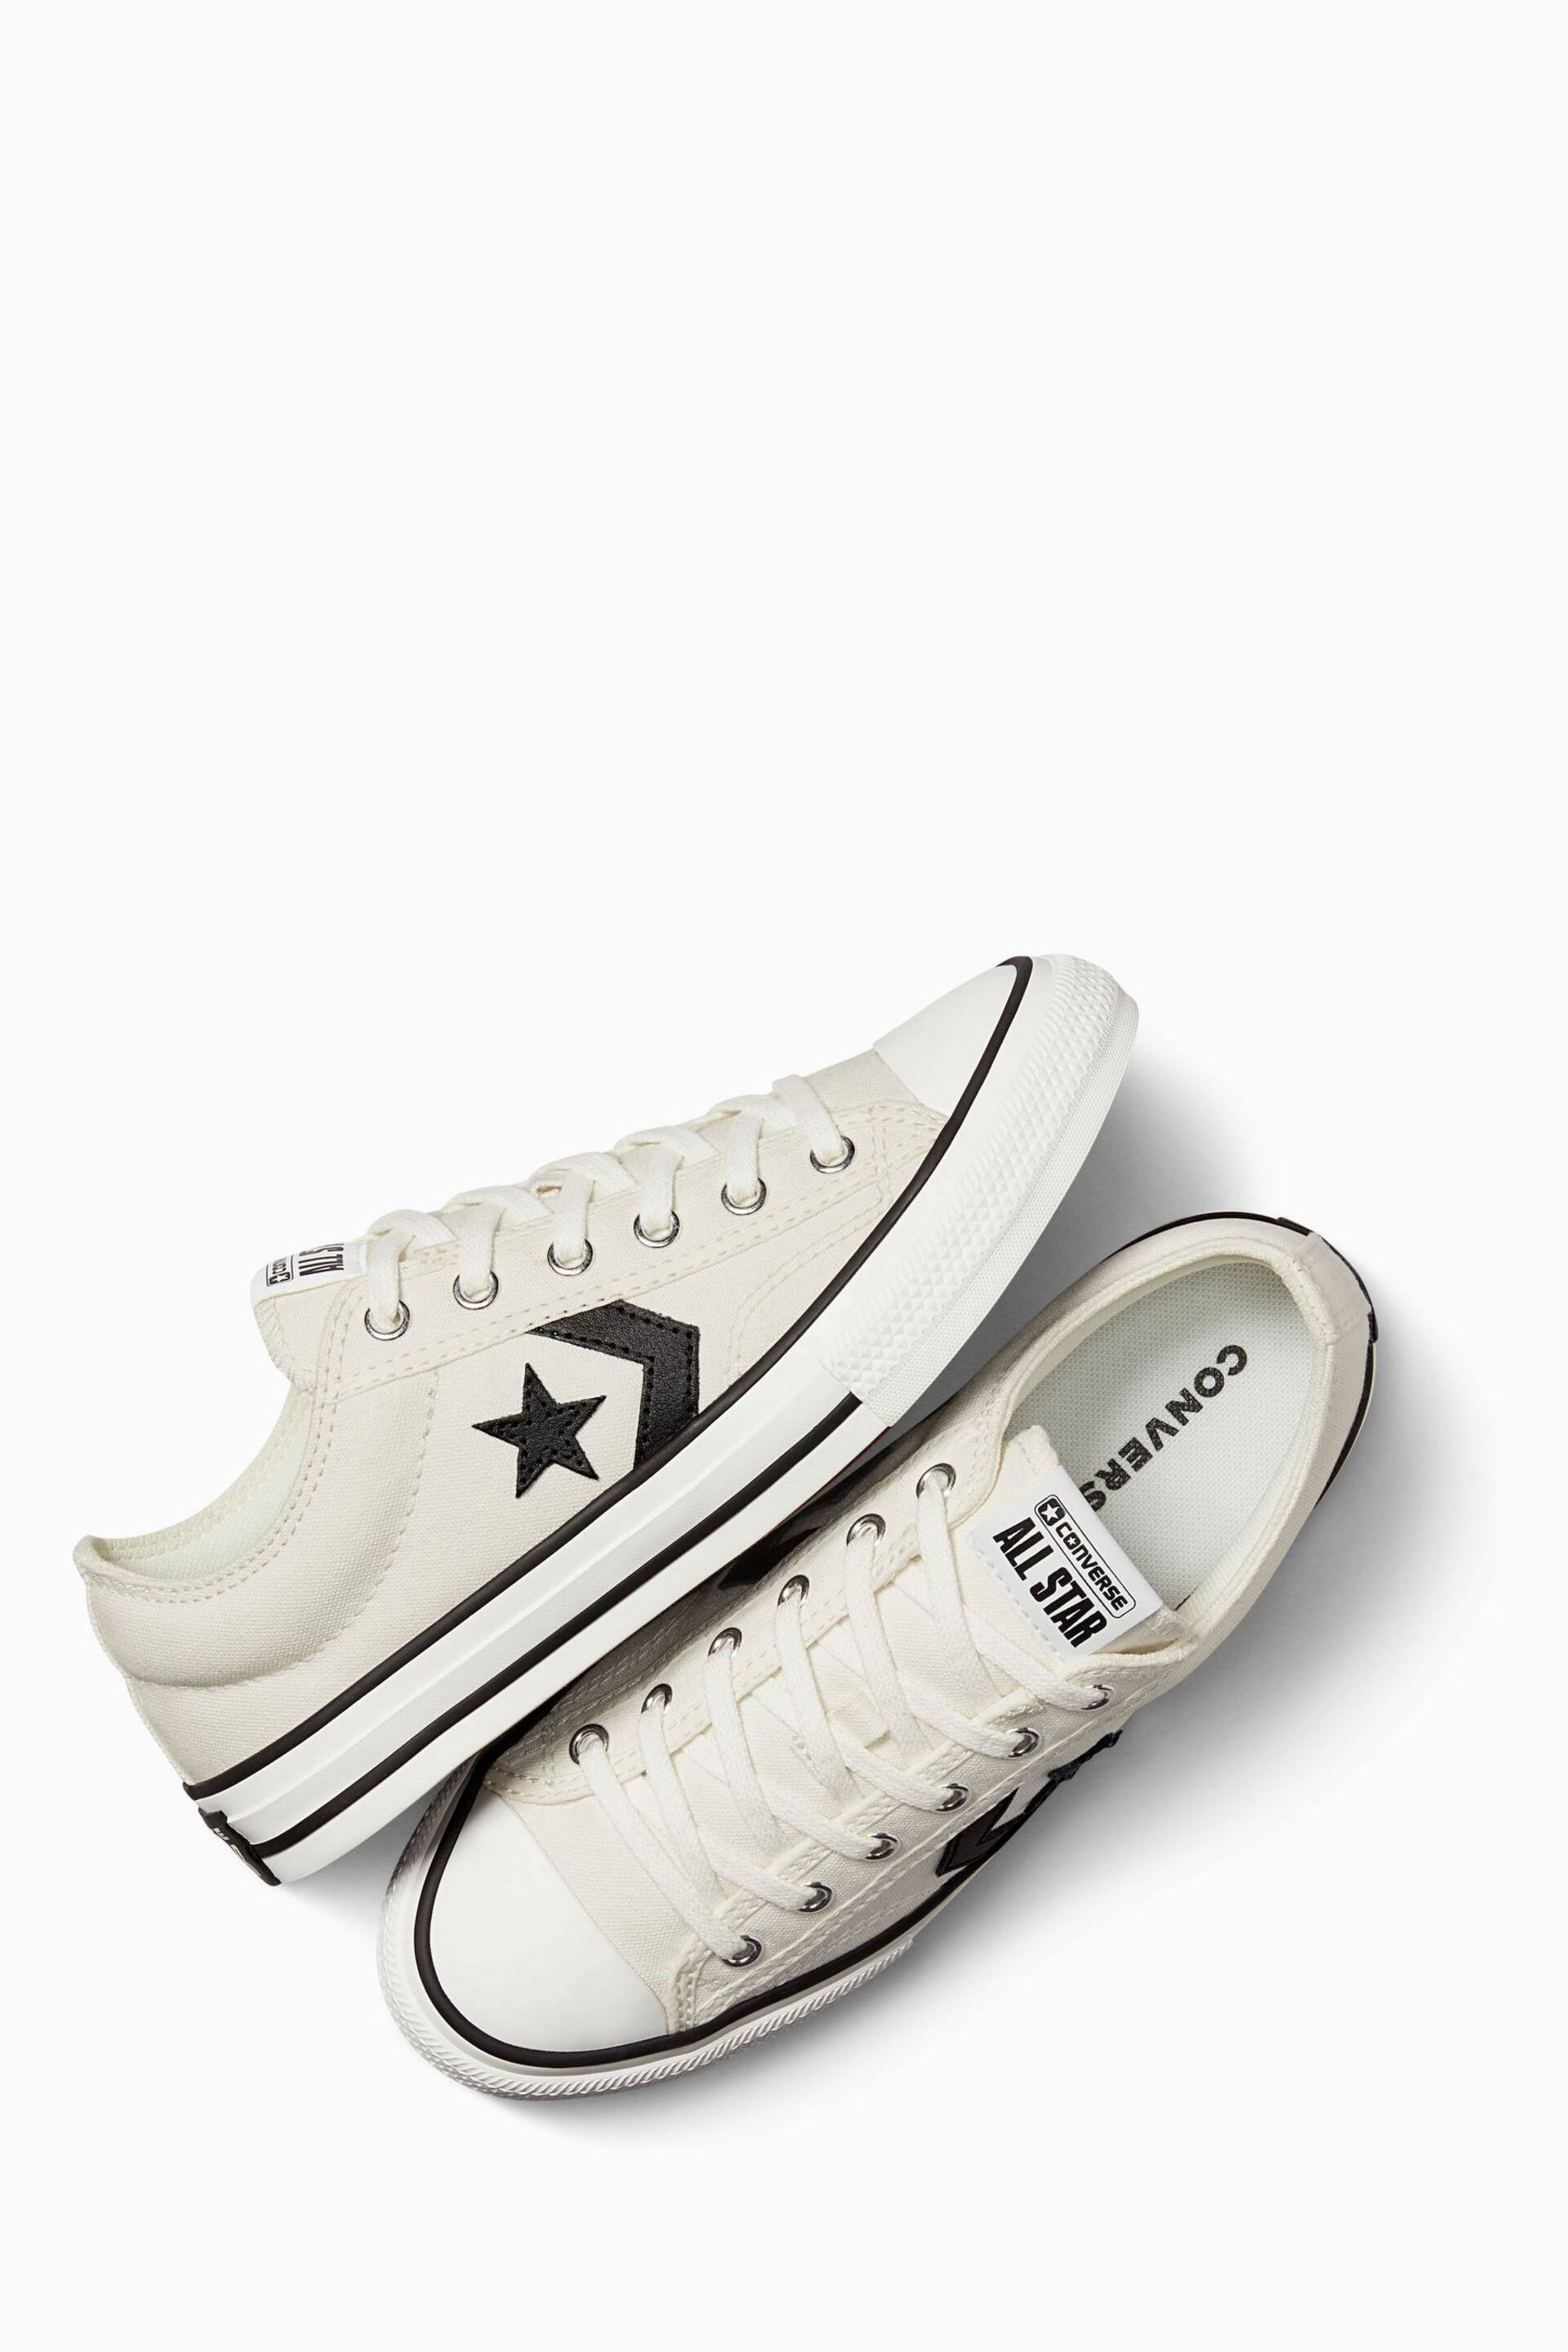 Converse White Youth Star Player 76 Trainers - Image 5 of 7